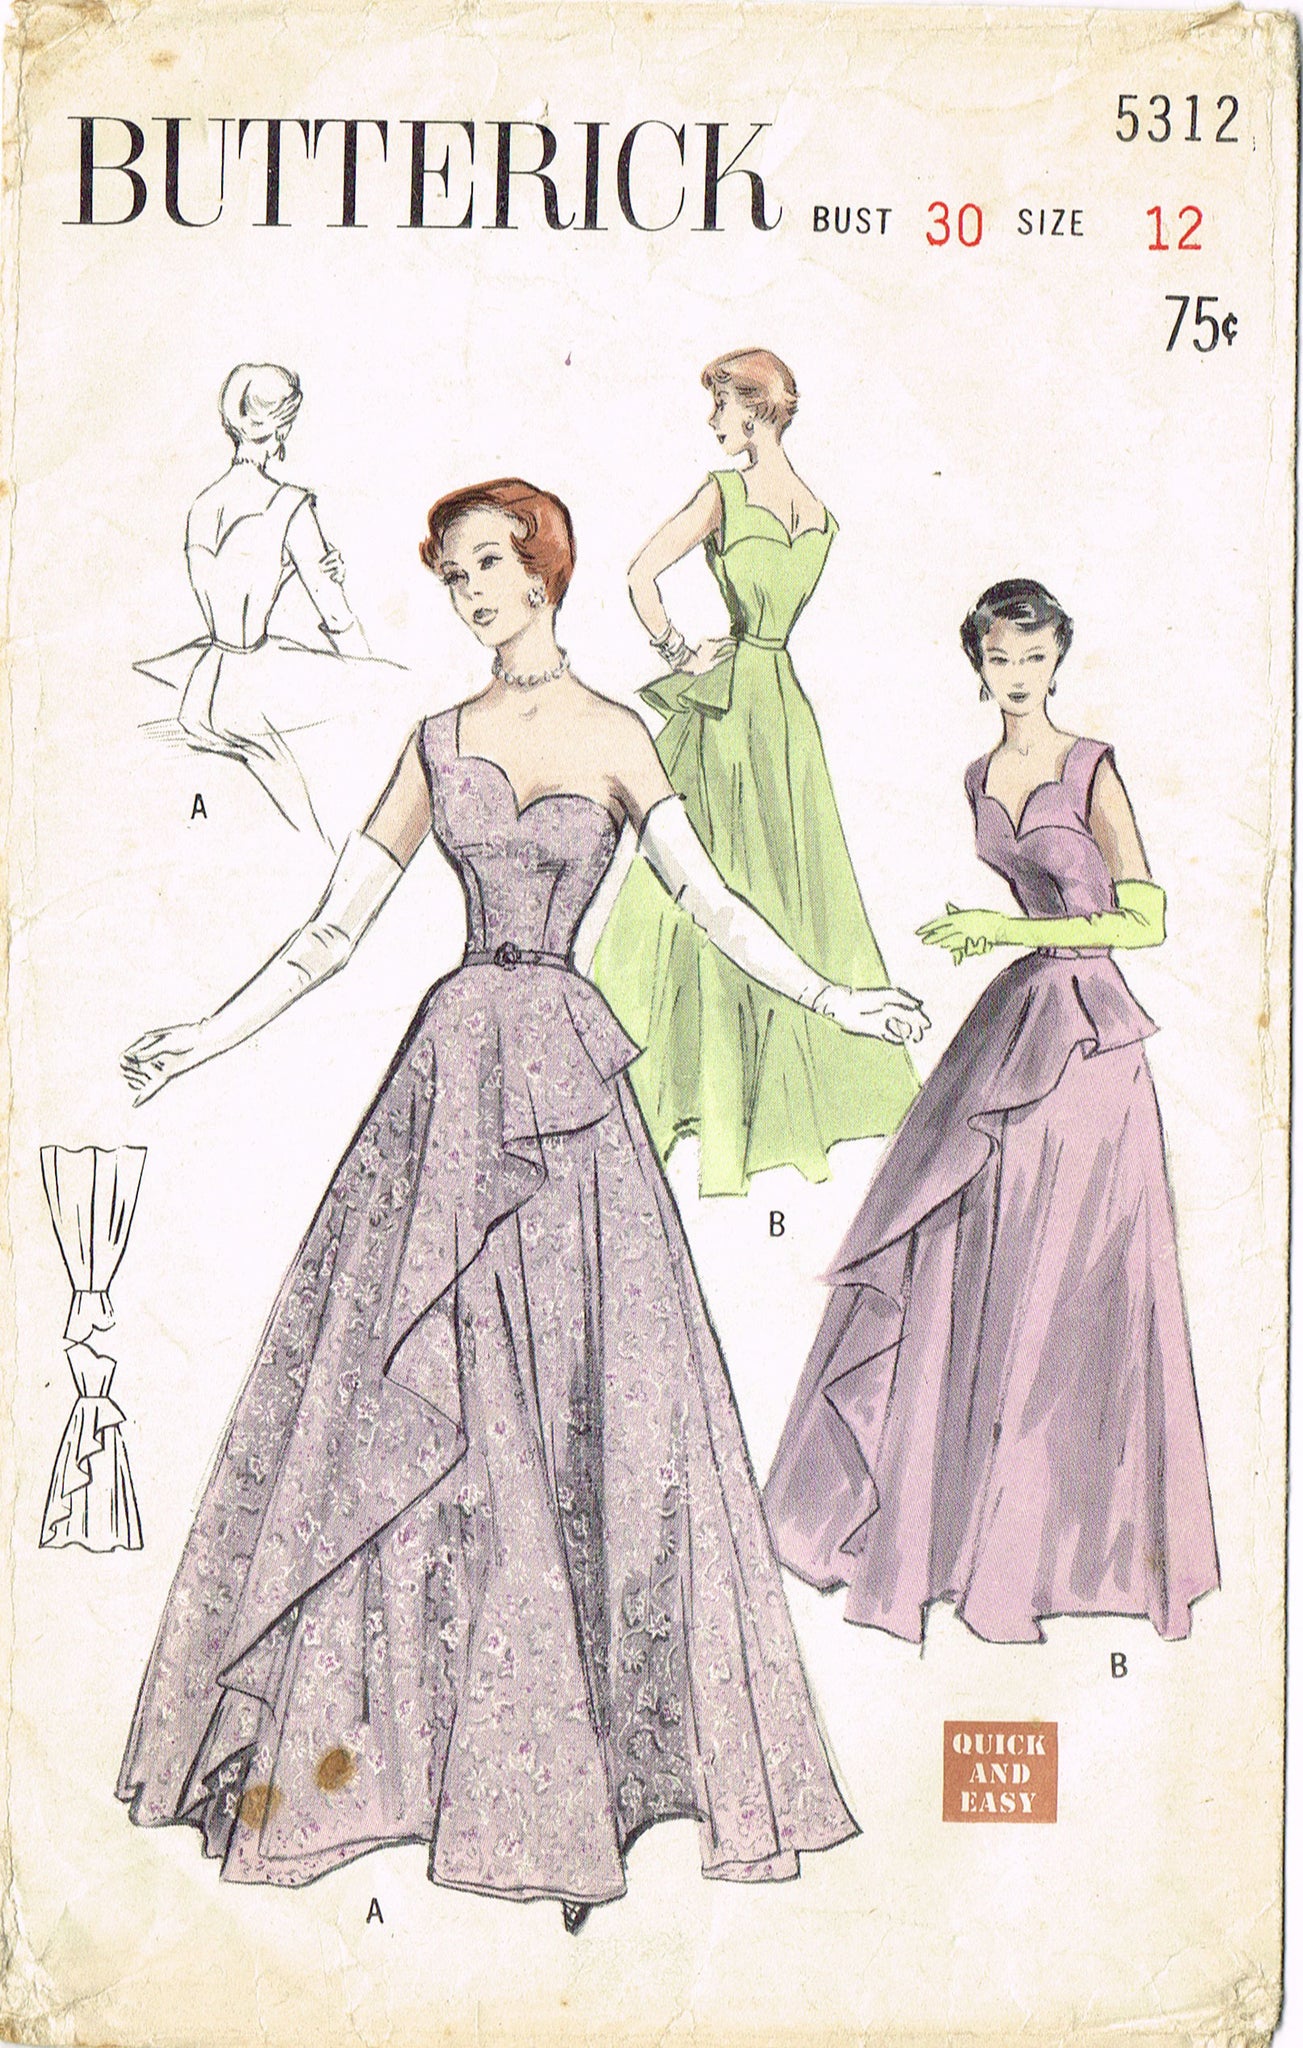 1950s Dress Patterns including Bridal Gowns and Evening Dresses